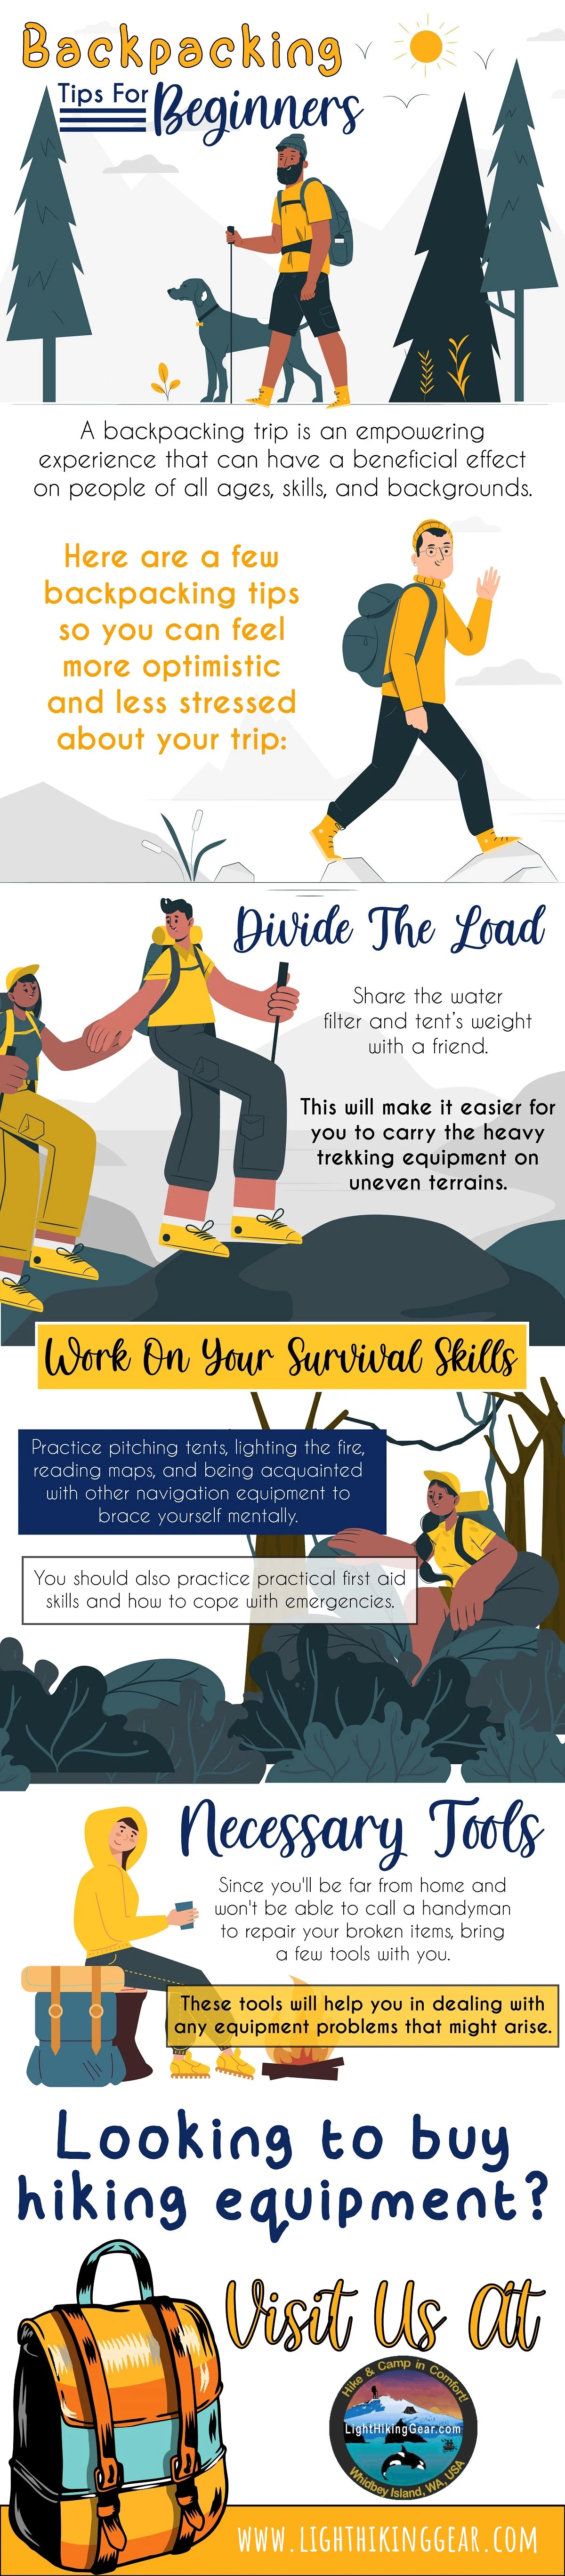 Backpacking Trips For Beginners | Infographic